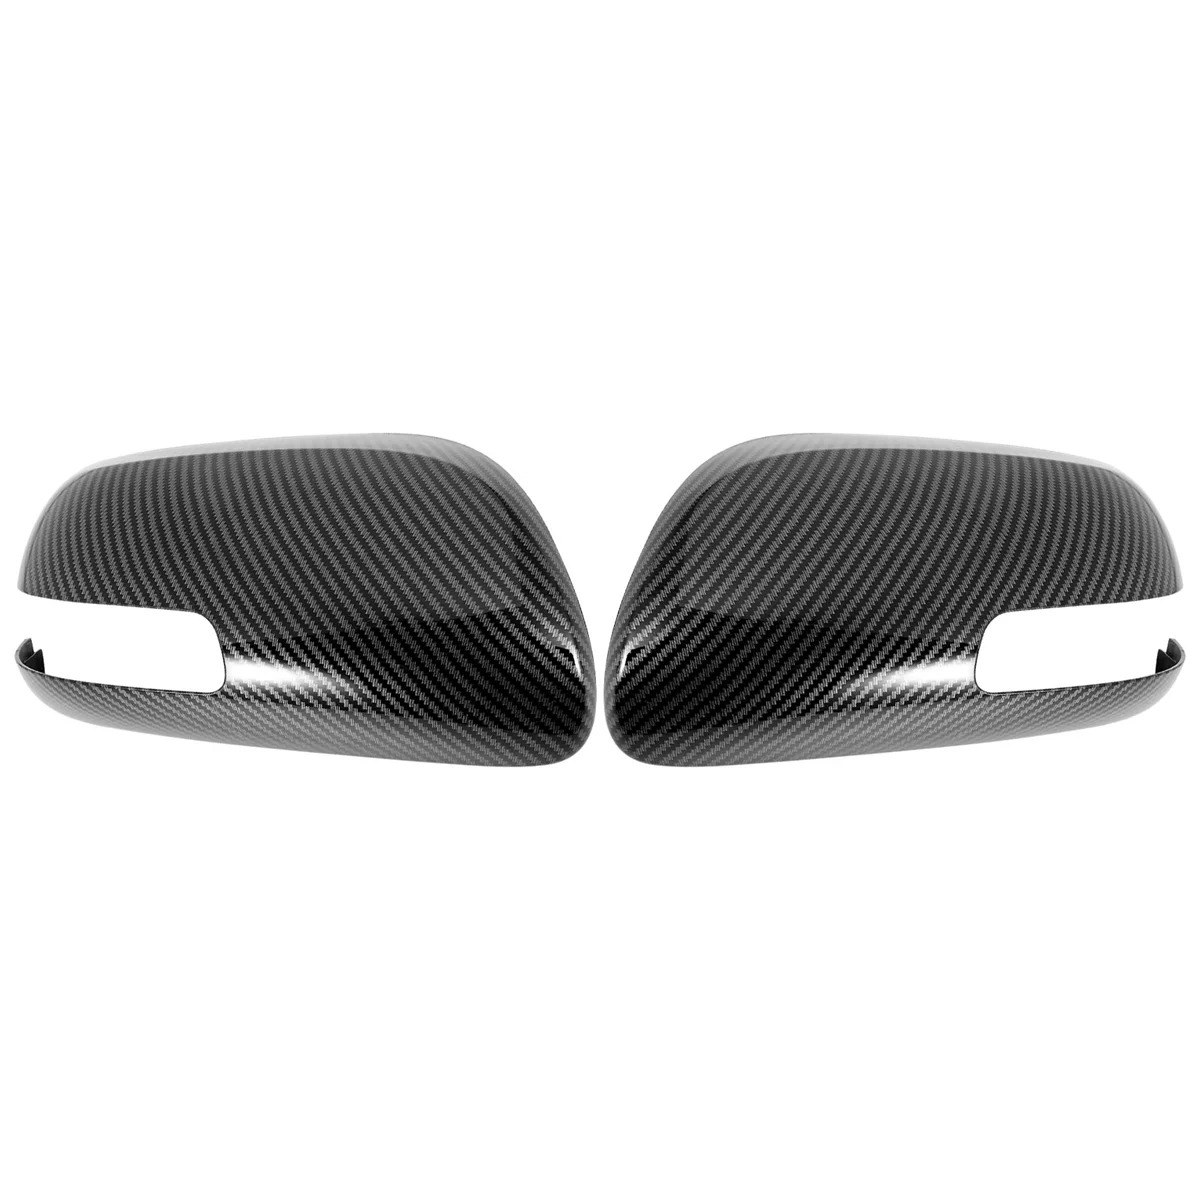 

1 Pair Rearview Side Mirror Case Housing Cover for Toyota Vios 2008-2013 Aurion Camry Asian Model 2006-2011